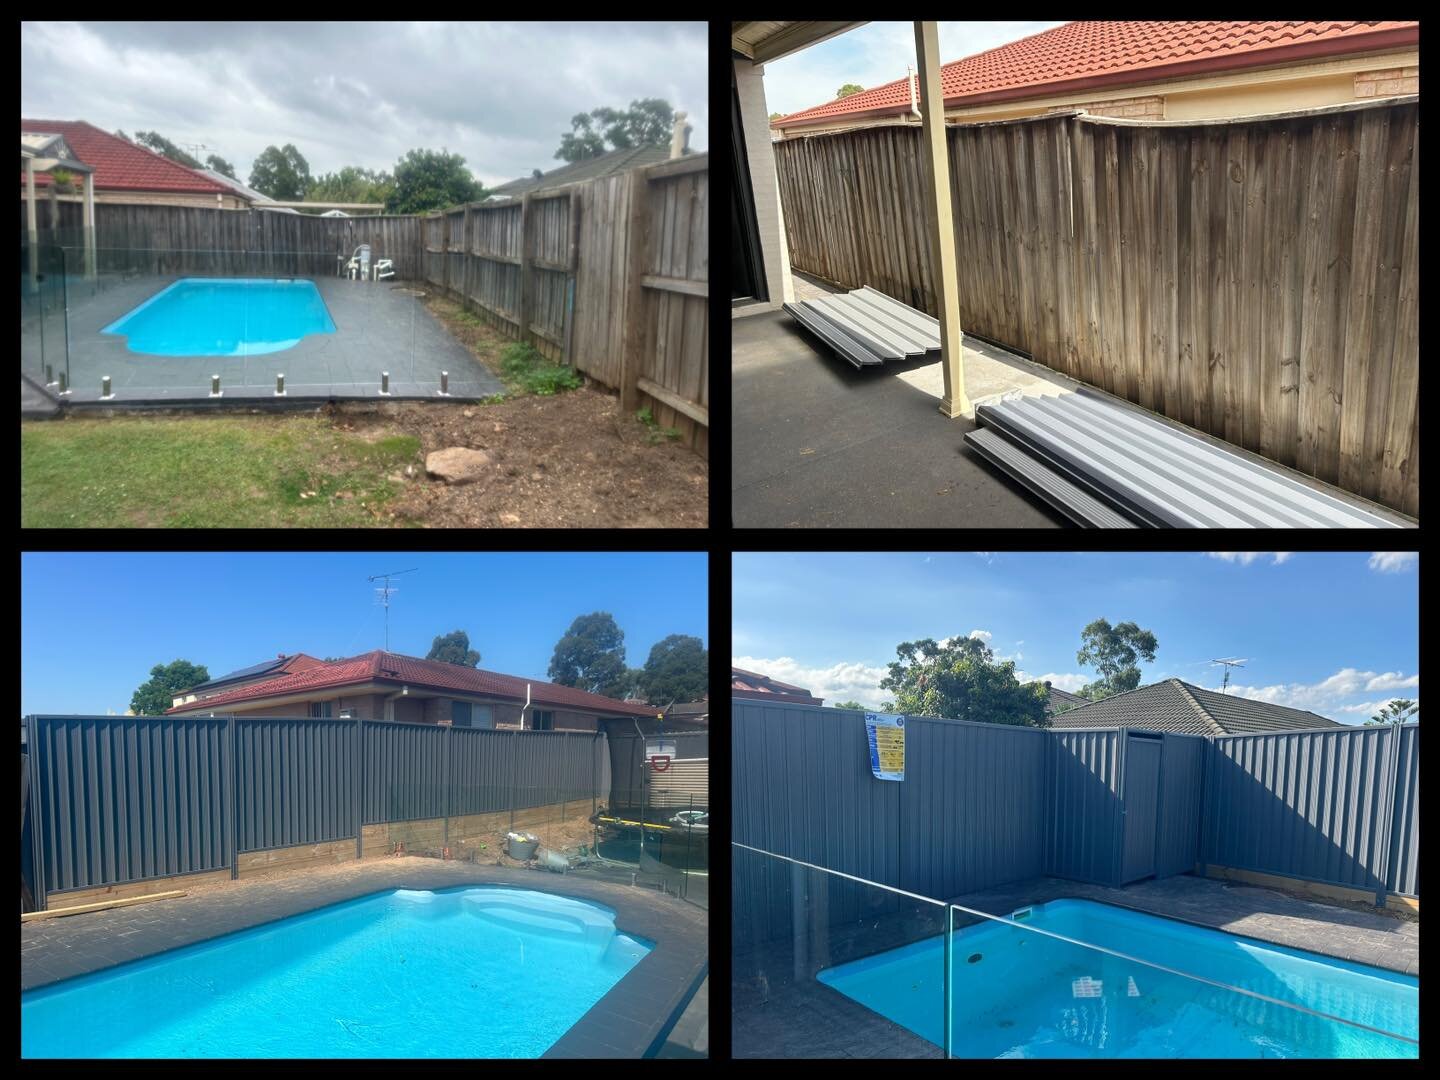 A few final touches to be added to this complete transformation for a lovely local family. Full boundary fence replacement, filter shed and other non compliance issues fixed up all ready for certification and pool compliance. #gardenfencing #glasspoo